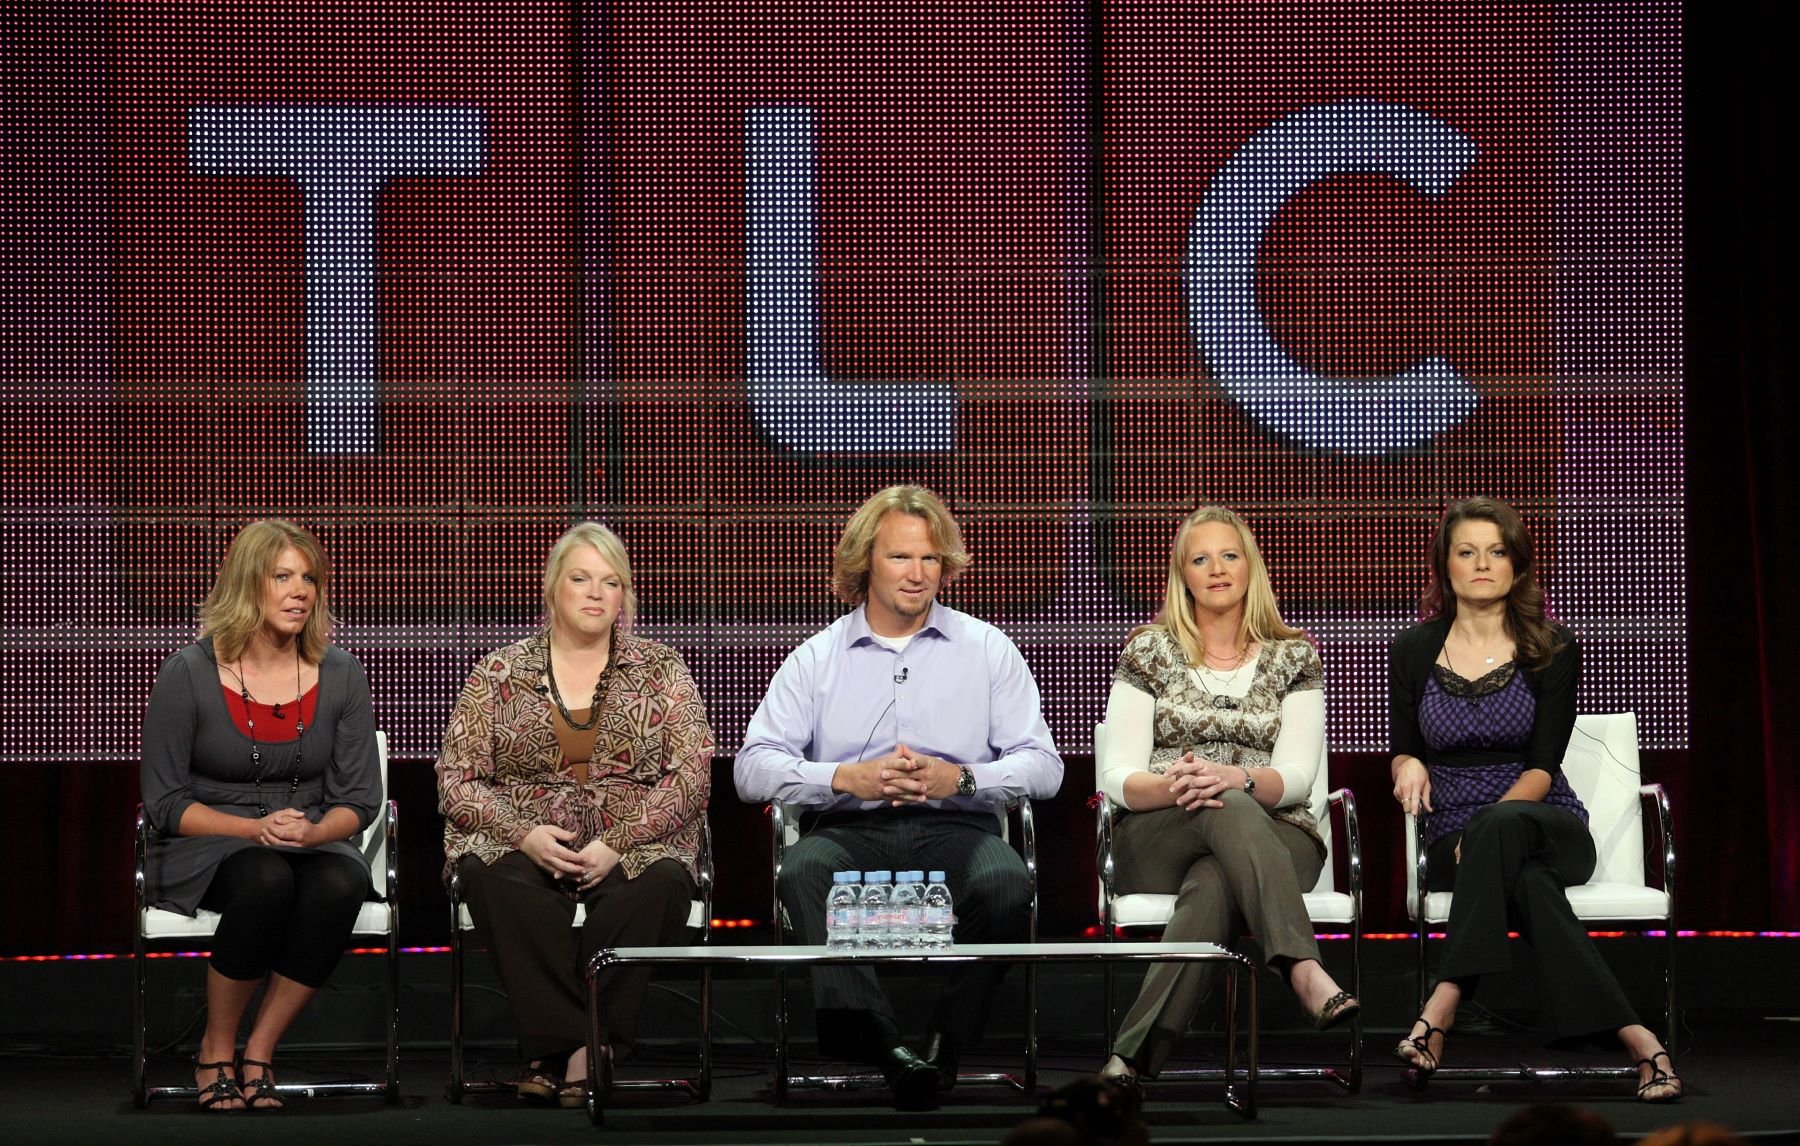 (L to R) Meri, Janell, Kody, Christine, and Robyn Brown during a 'Sister Wives' panel for TLC